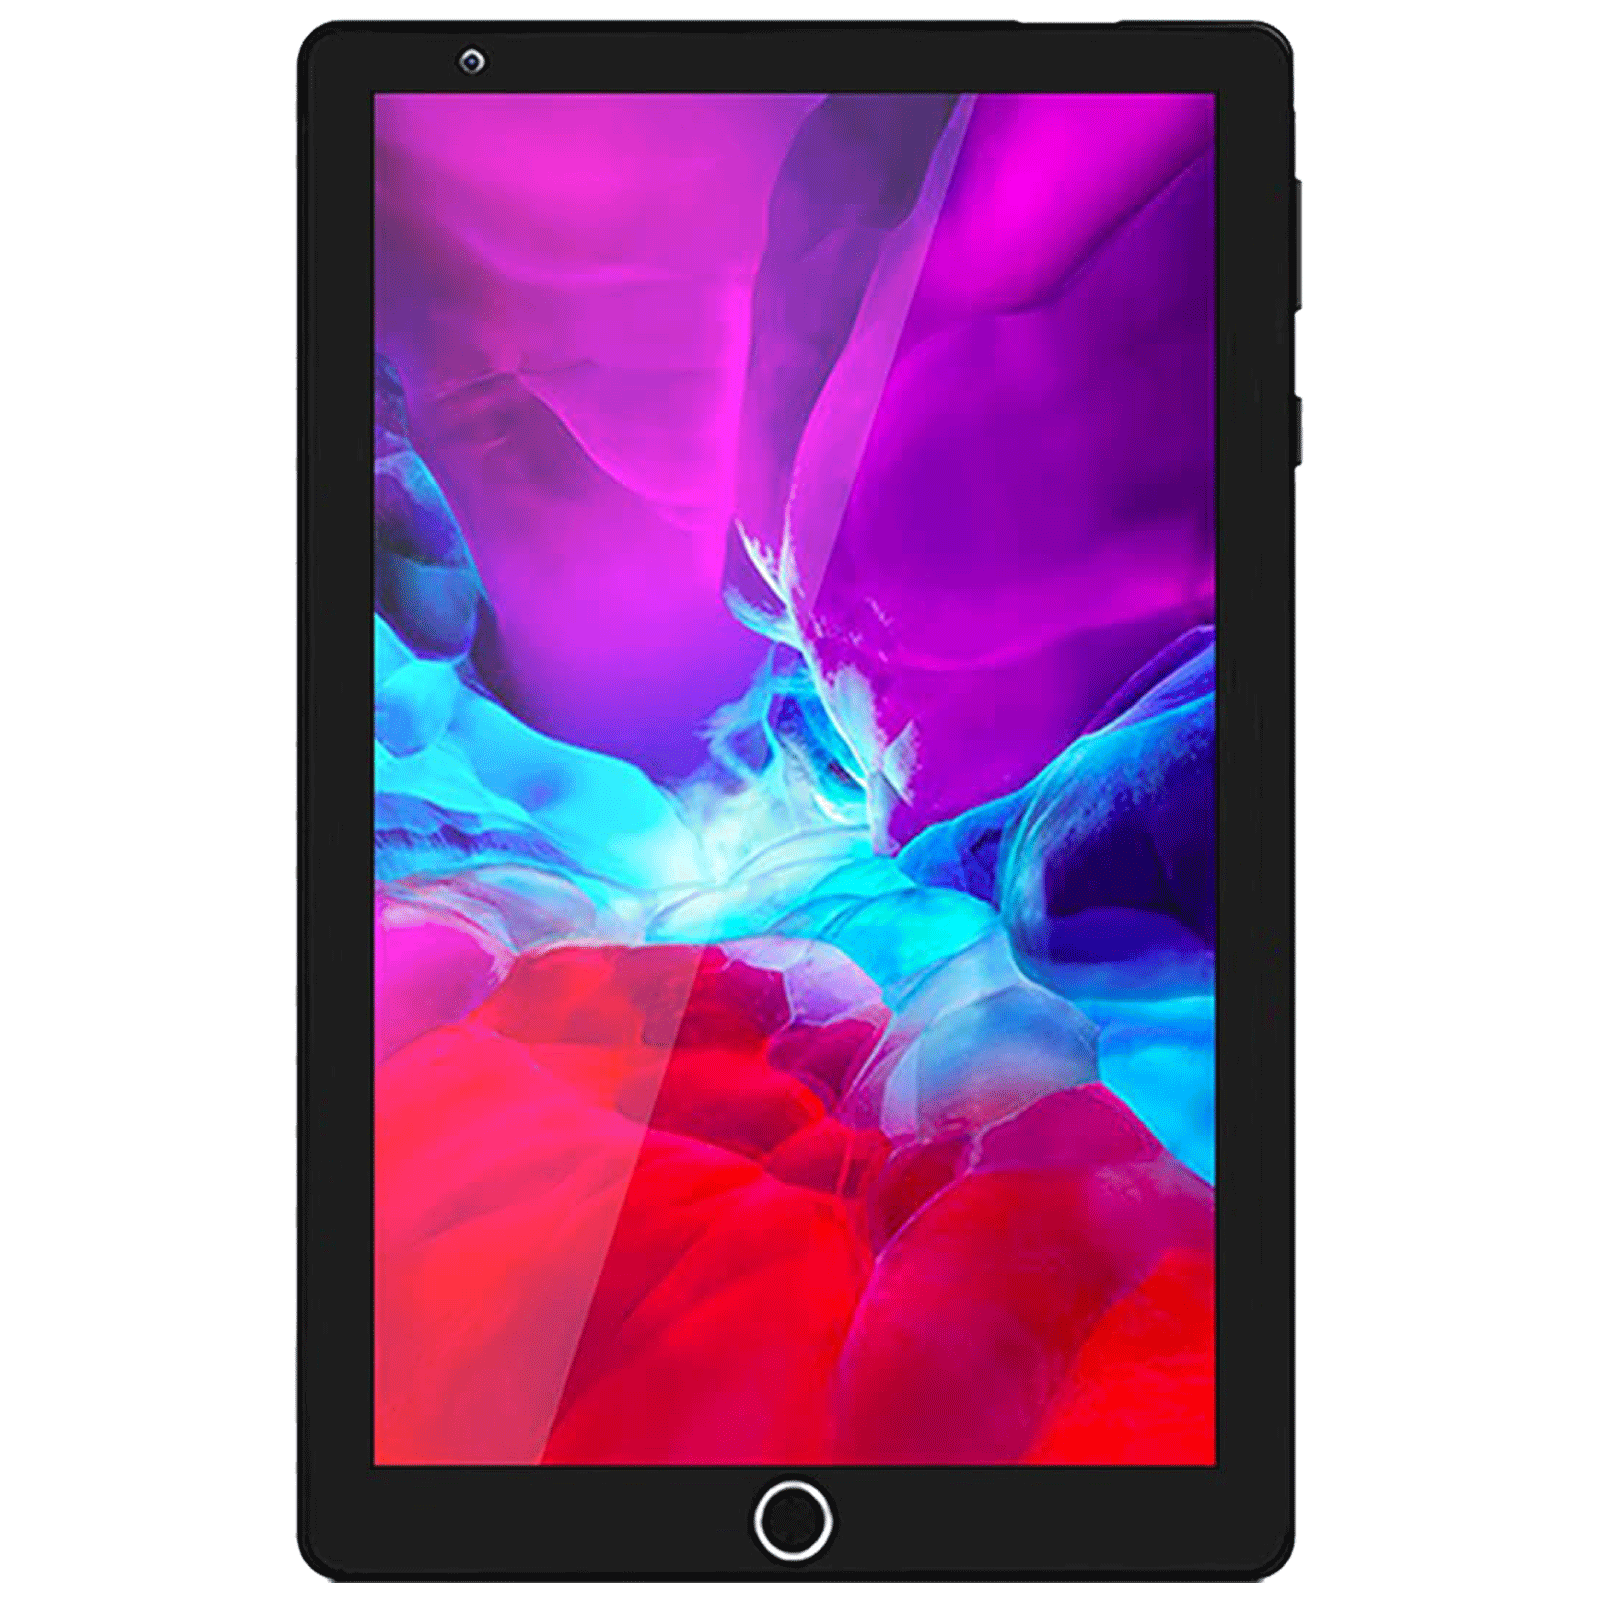 I KALL N16 Wi-Fi + 3G Android Tablet (Android 6.0 20.32cm (8 Inches), 2GB RAM, 16GB ROM, Grey)_1